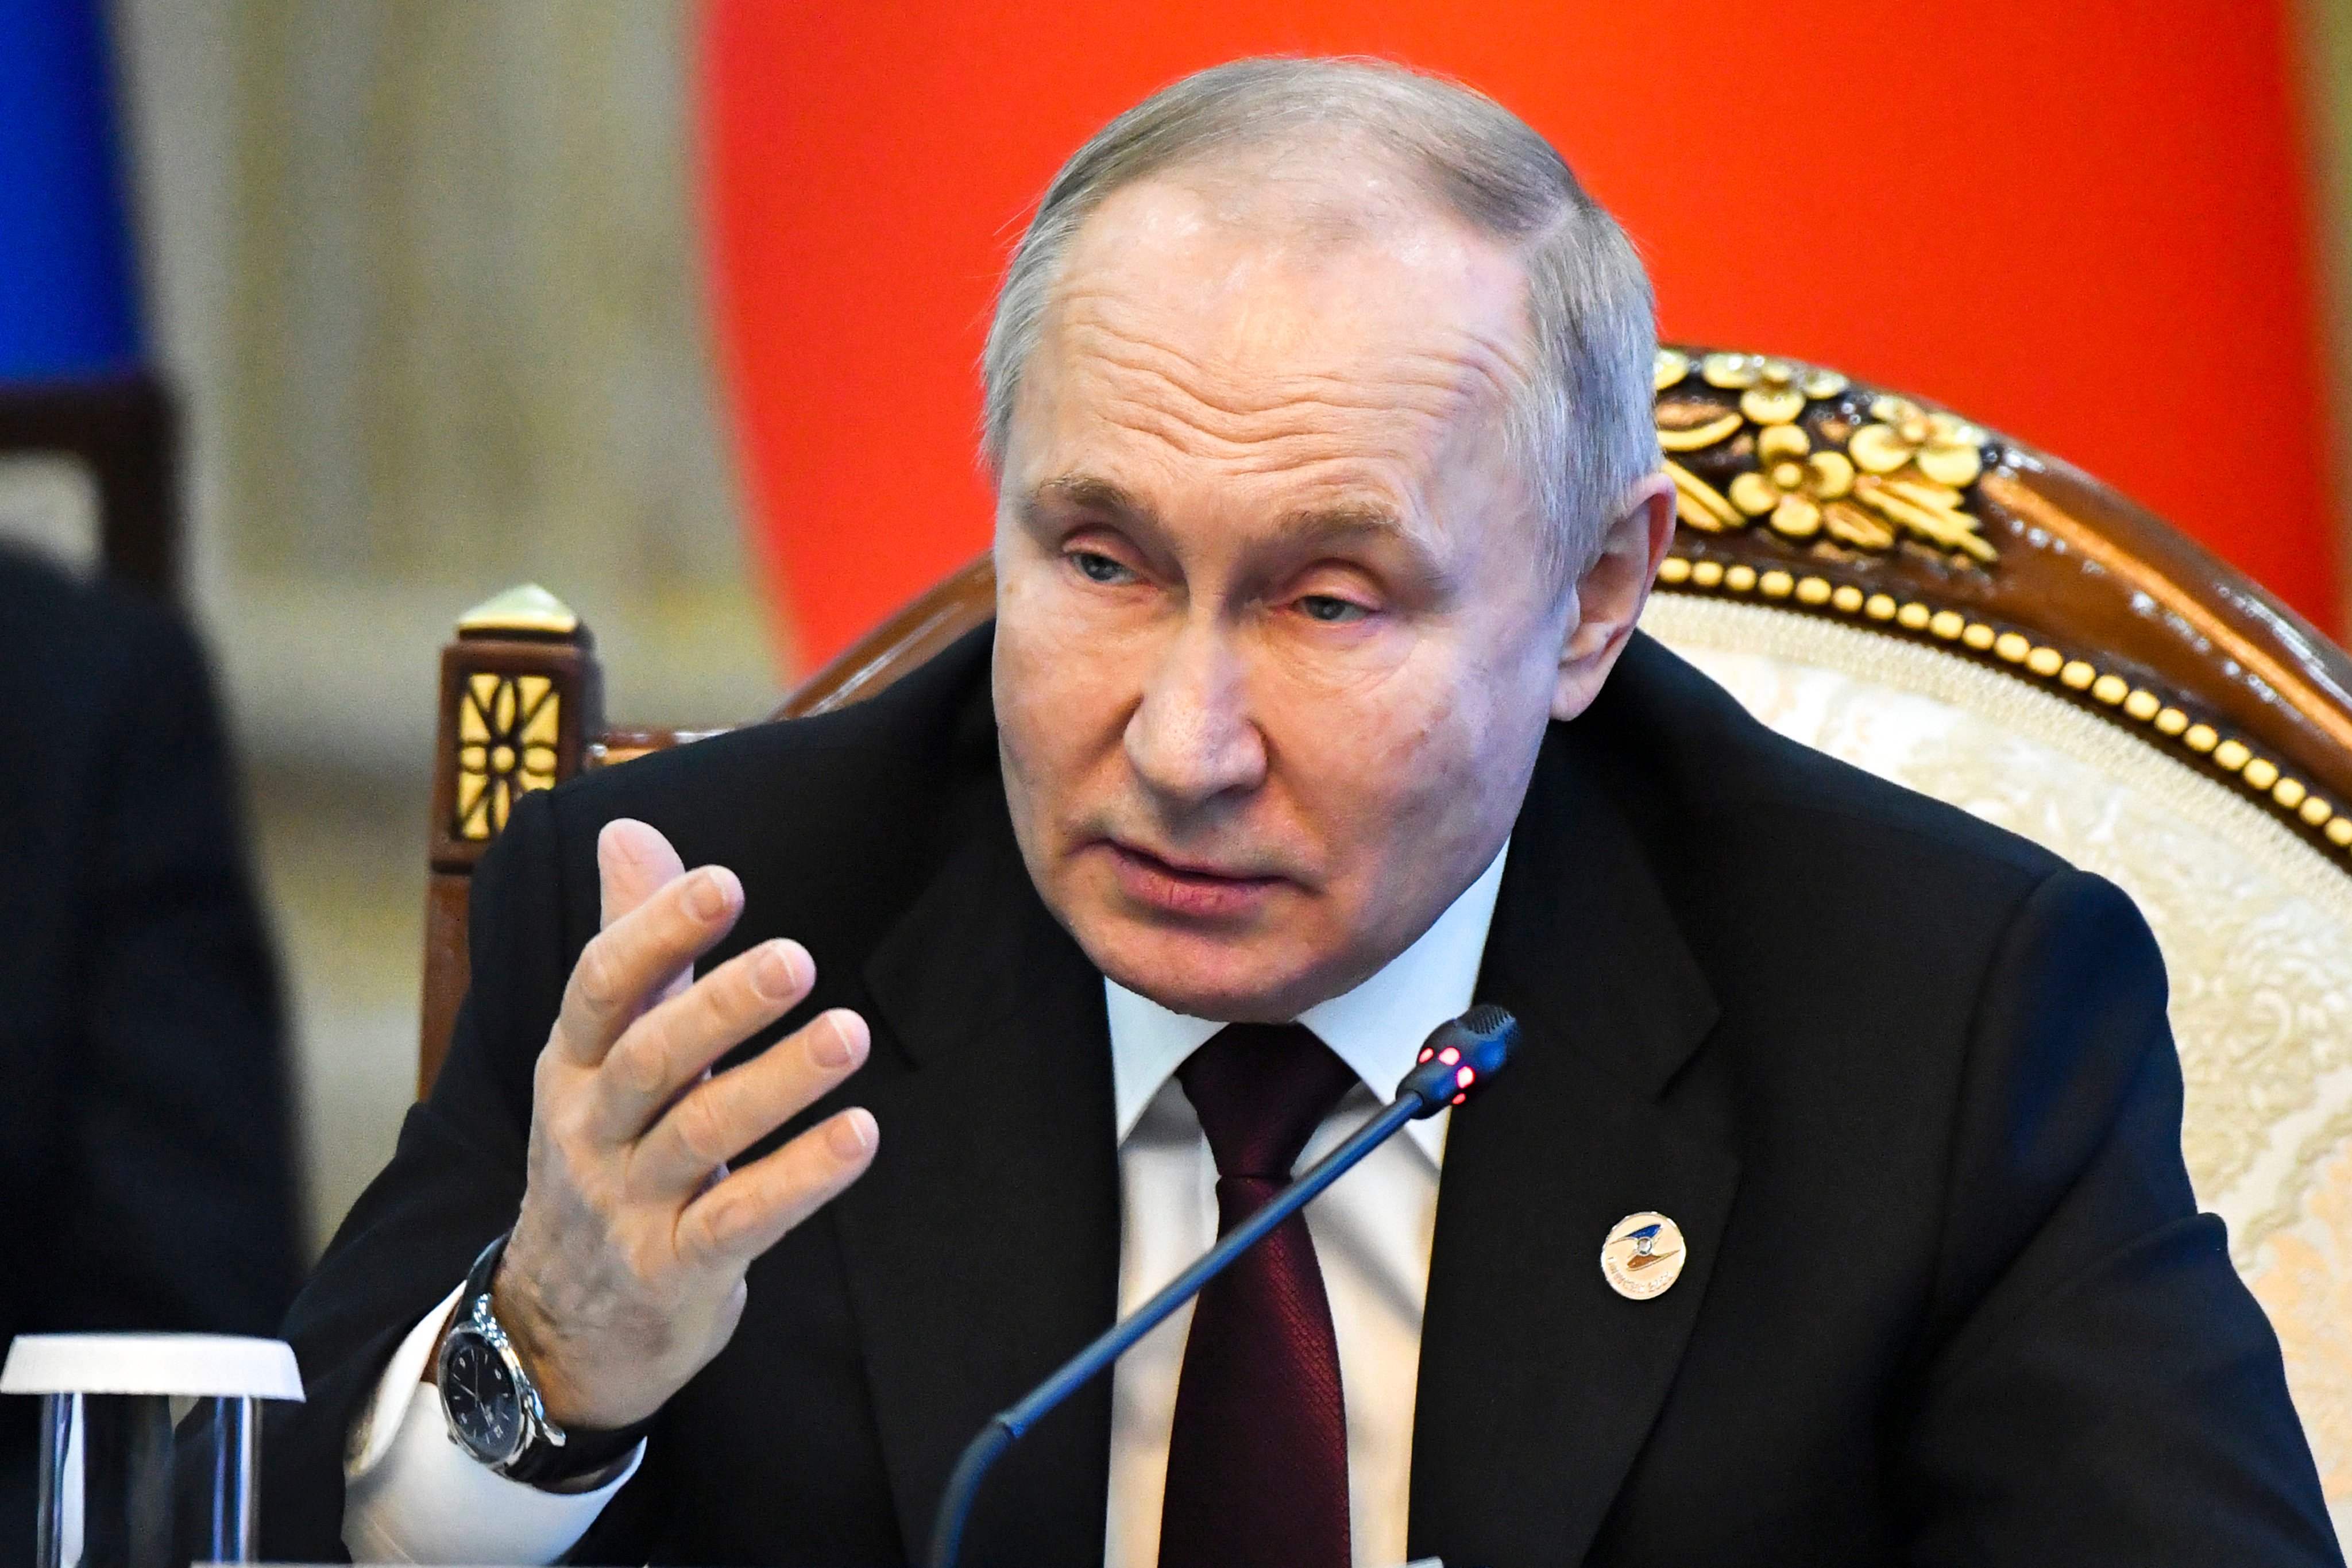 When the Belt and Road Initiative was announced a decade ago, Russia’s Vladimir Putin was not enthusiastic about China’s massive infrastructure drive moving into his country’s “backyard”. Photo: AP